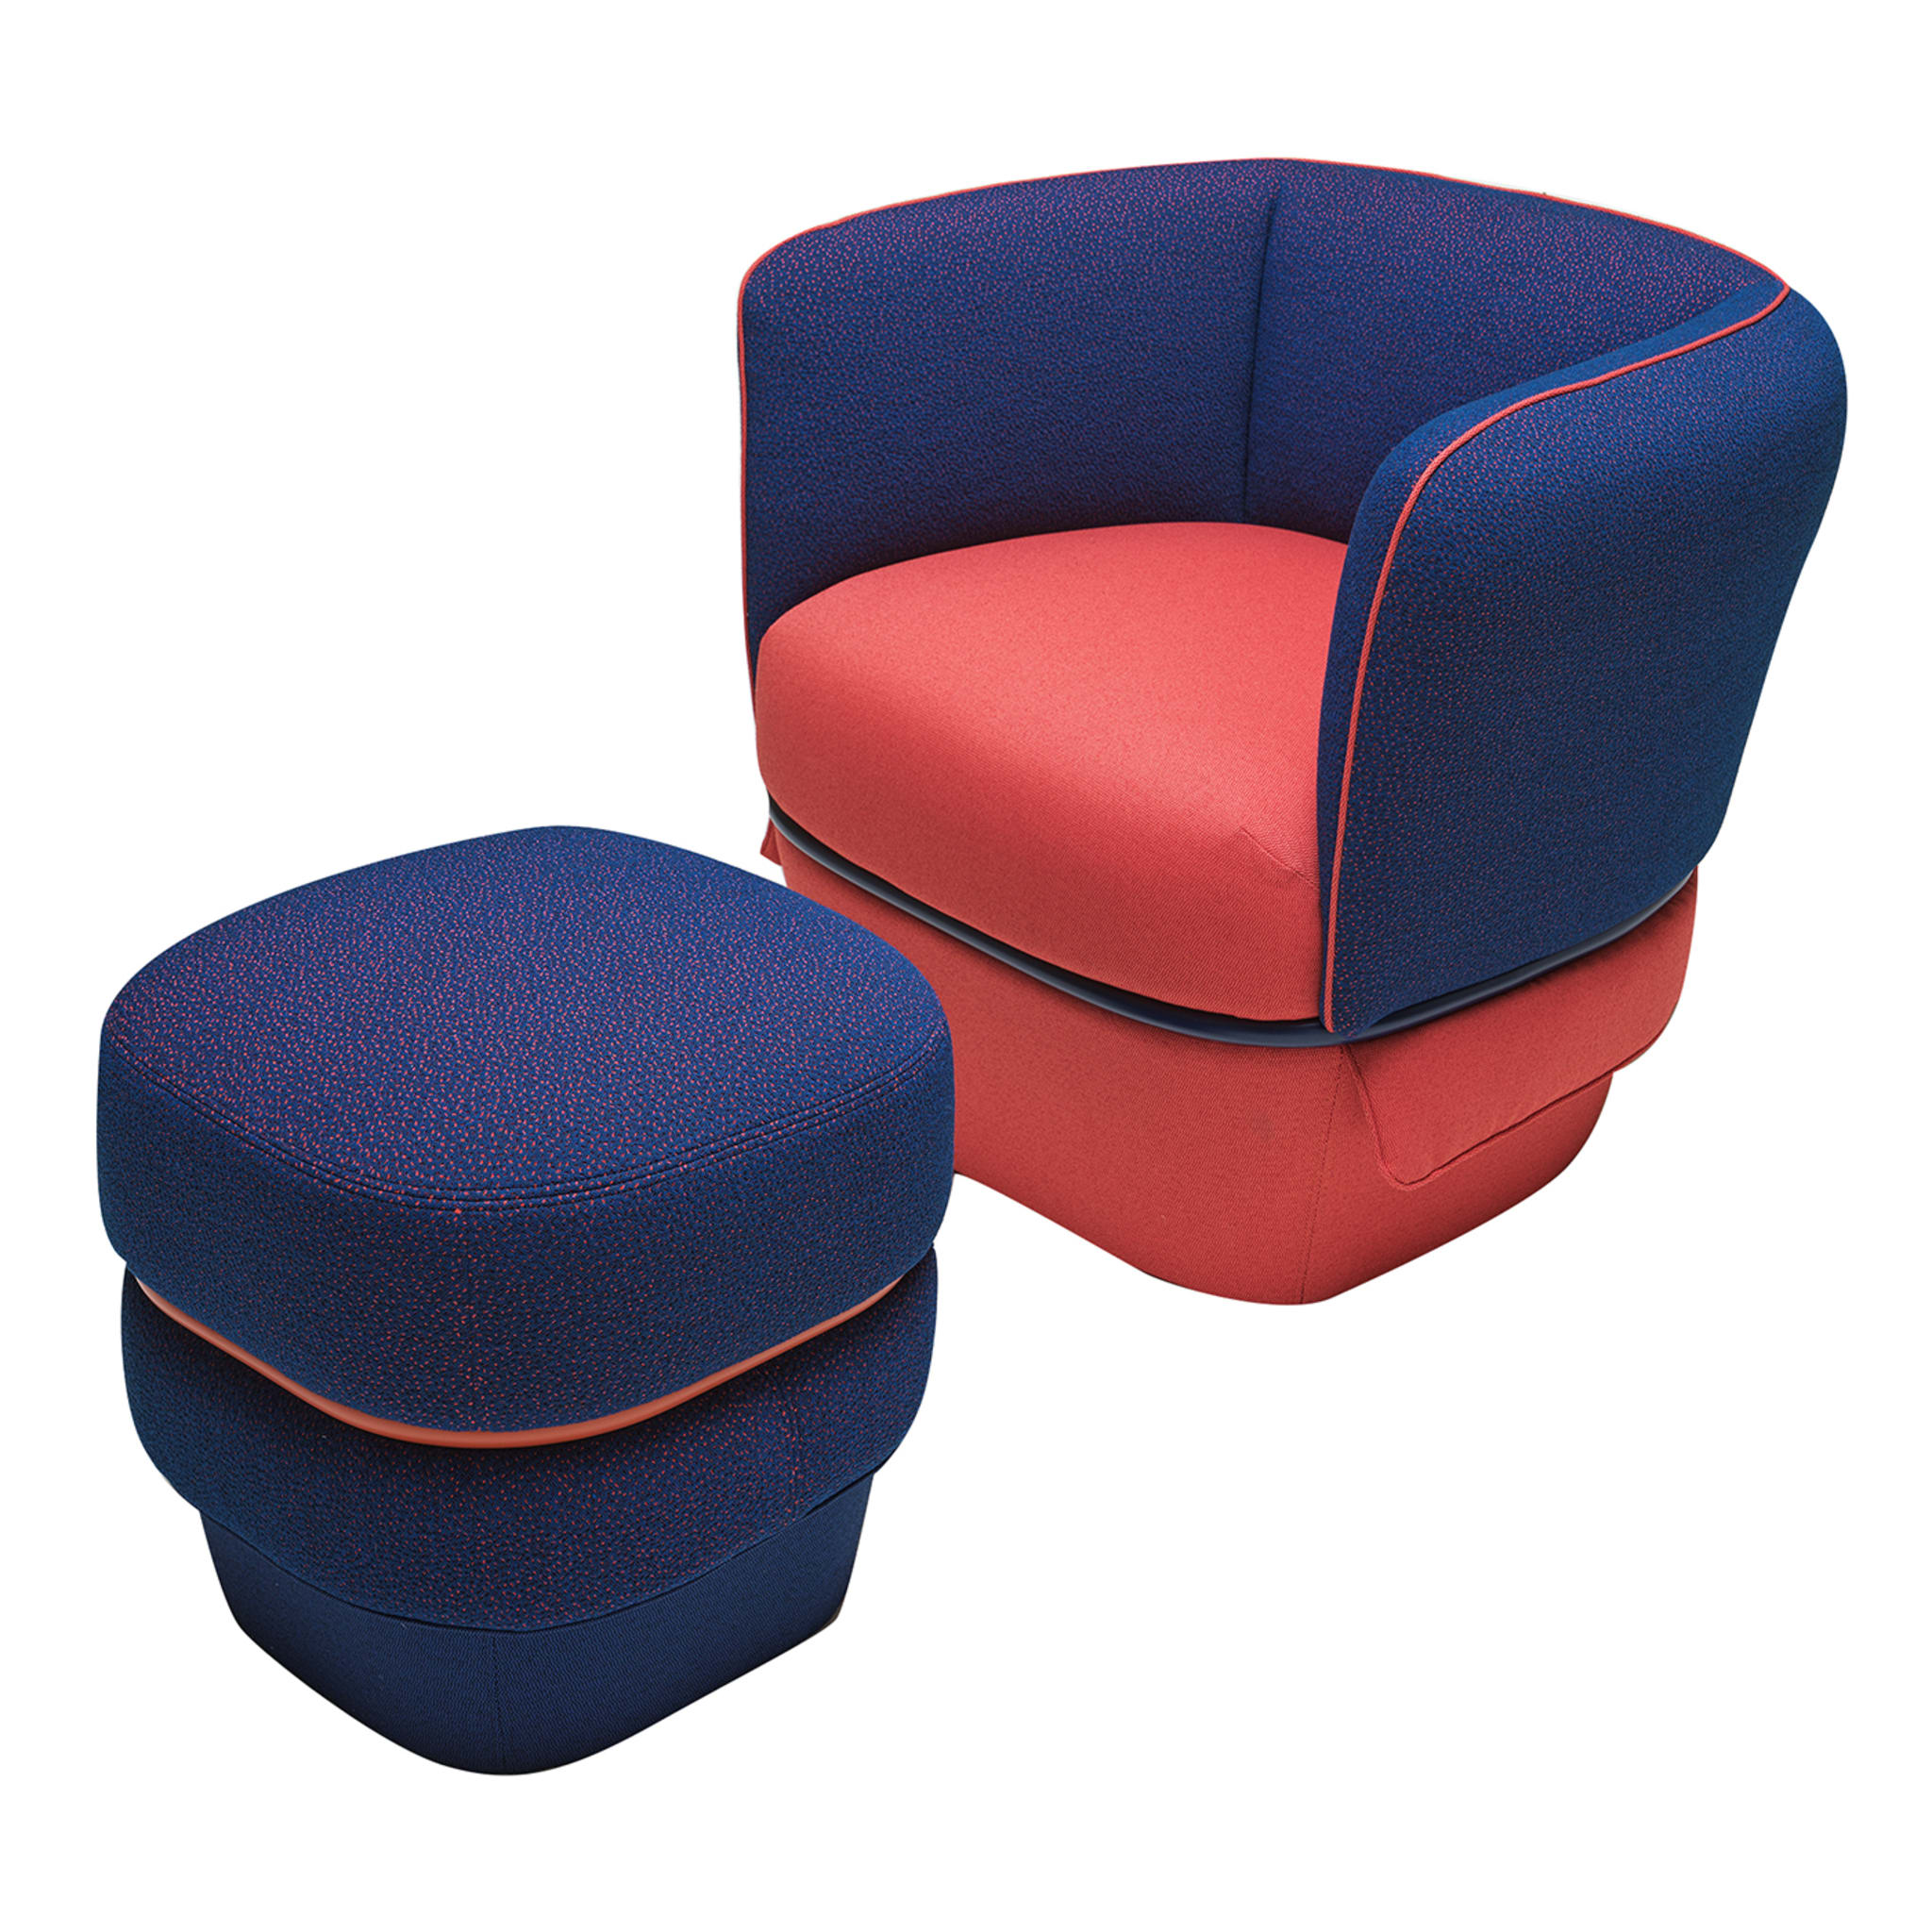 Chemise Set of Red and Blue Armchair and Pouf by Studio LI_DO - Main view